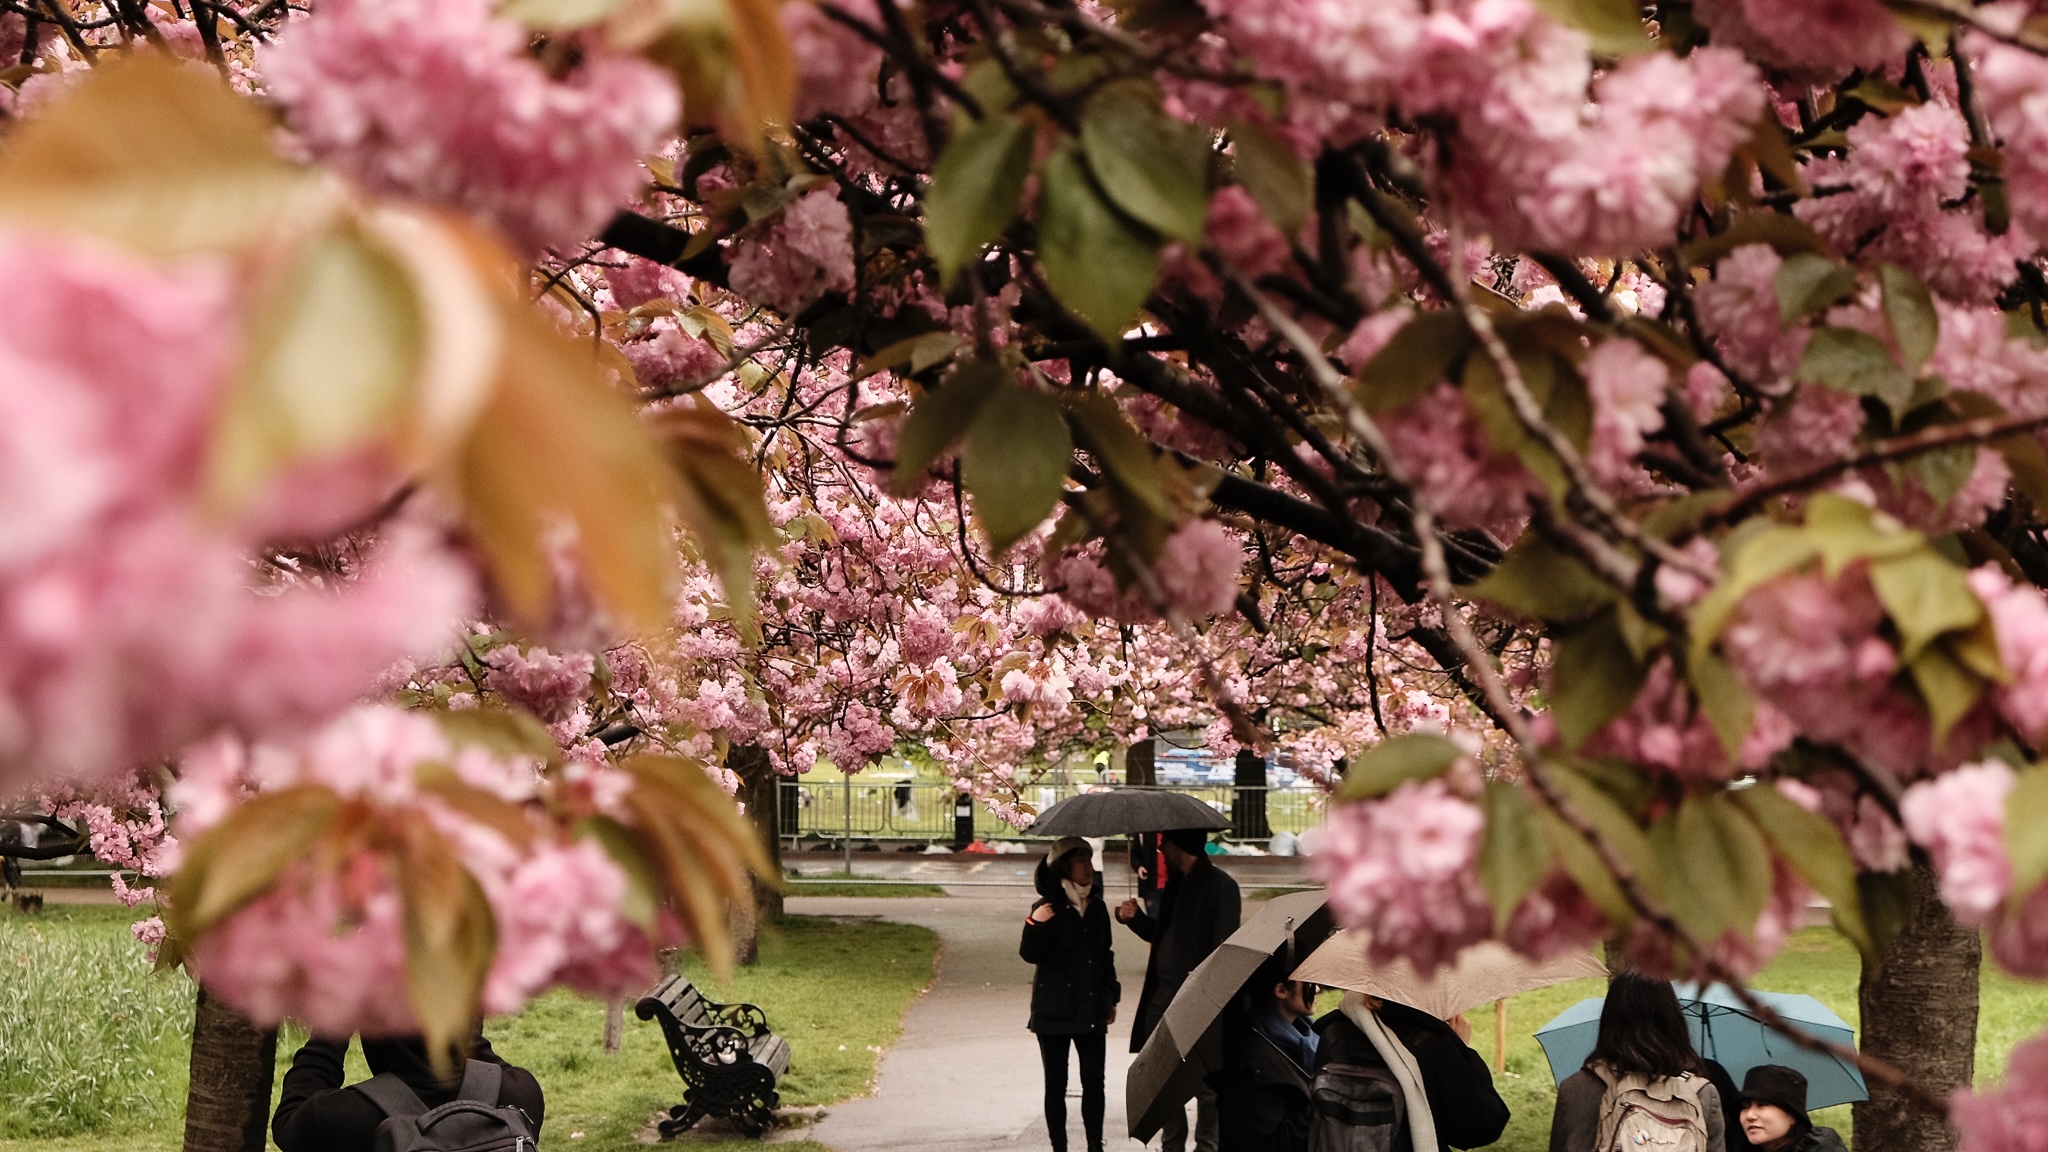 People enjoying the cherry blossoms in the park